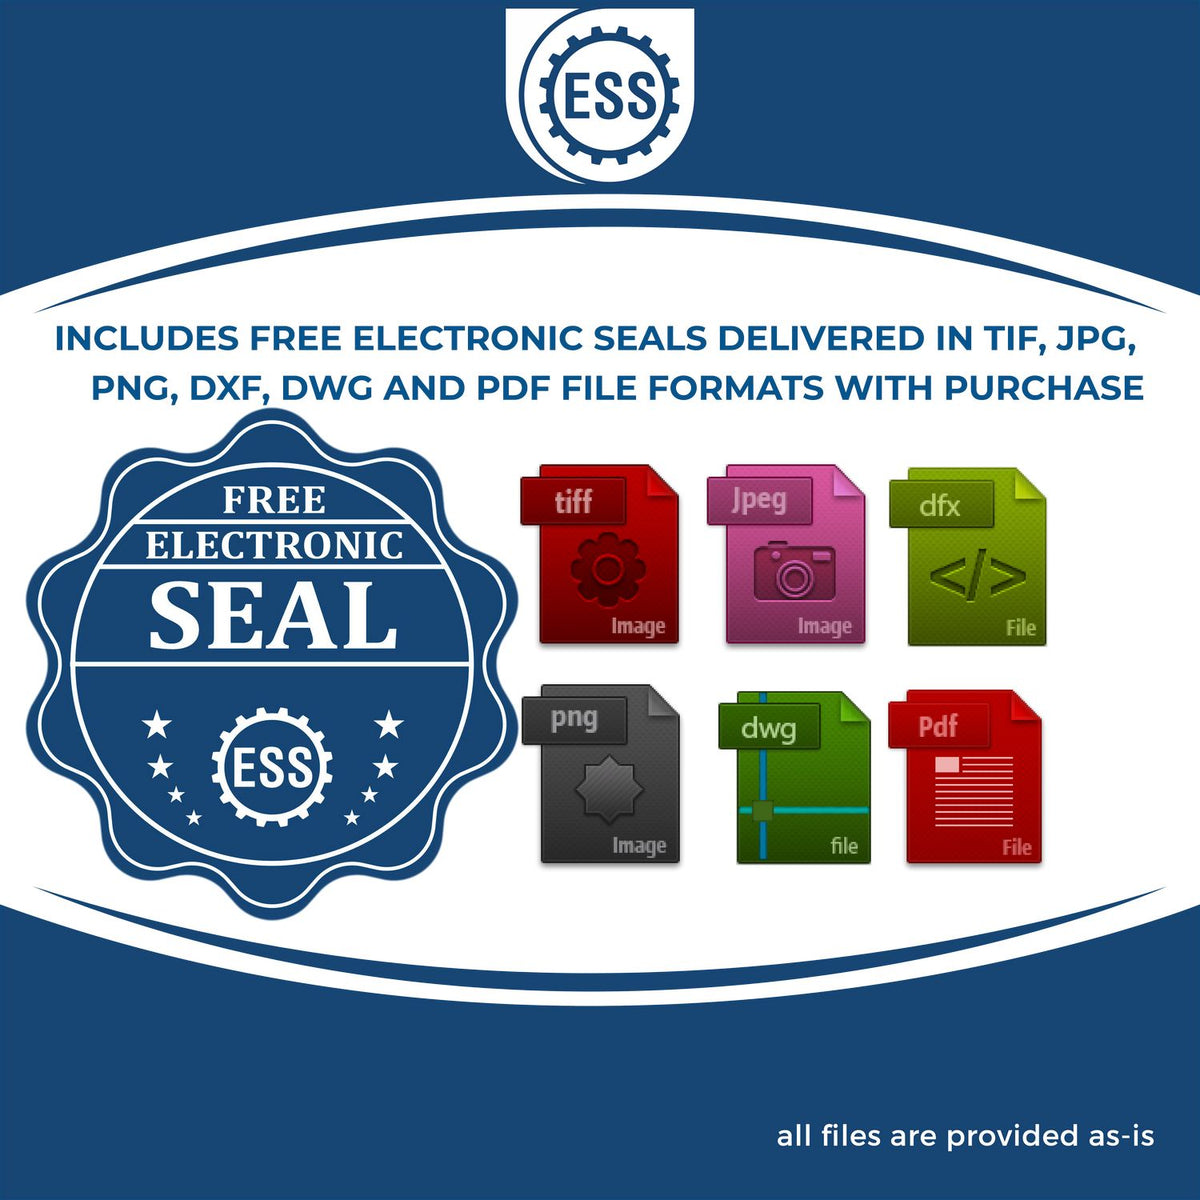 An infographic for the free electronic seal for the Gift Delaware Architect Seal illustrating the different file type icons such as DXF, DWG, TIF, JPG and PNG.